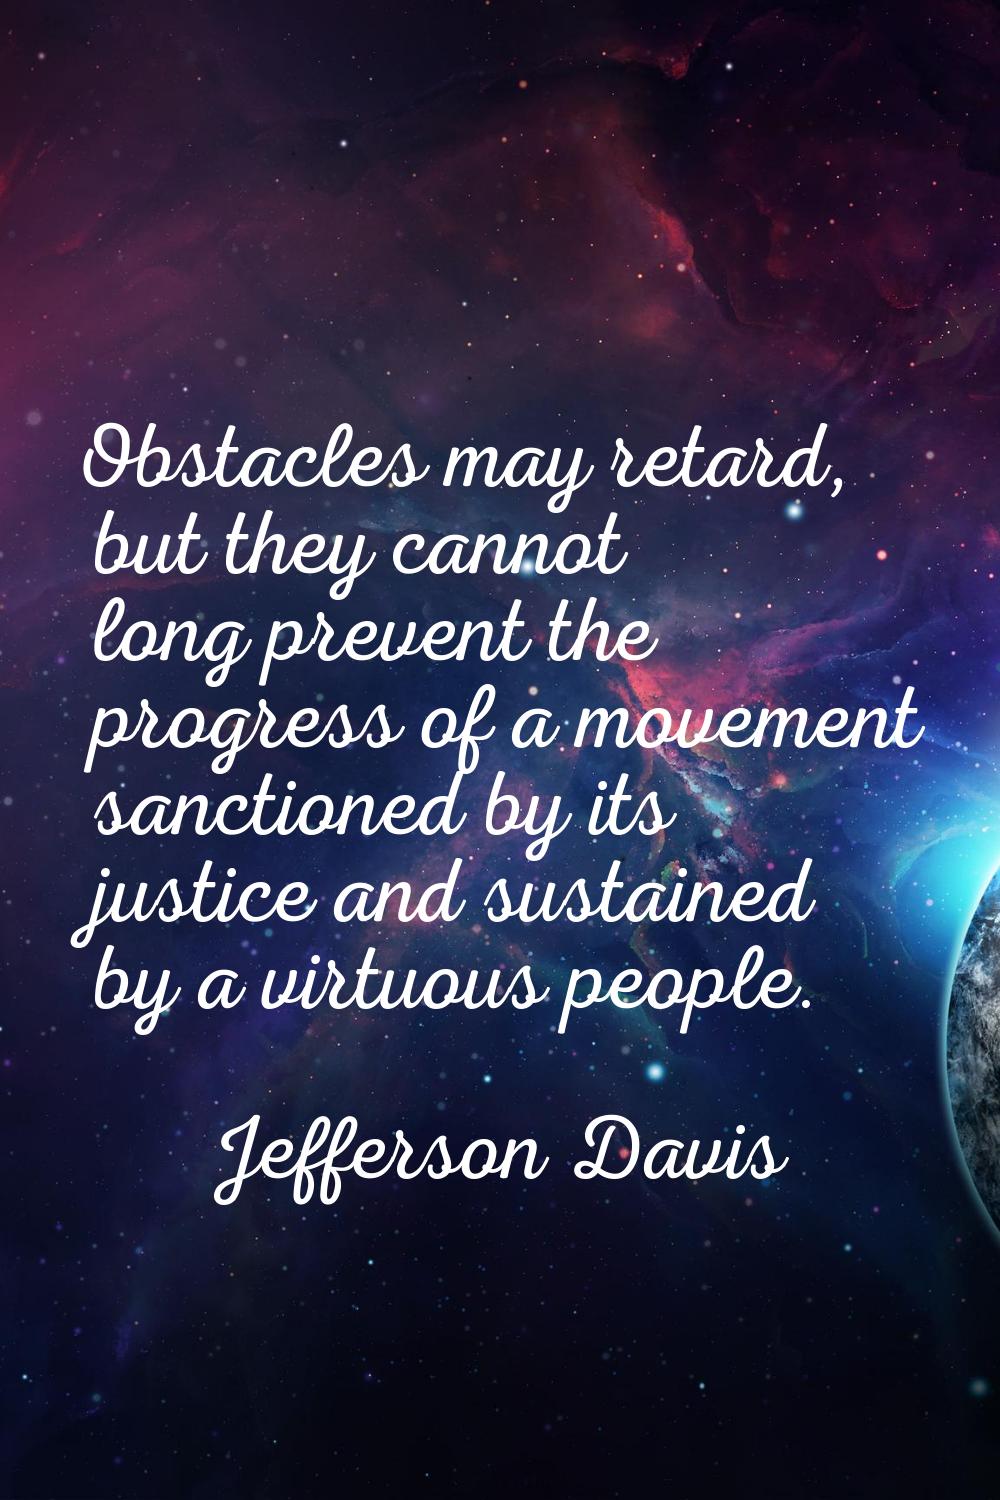 Obstacles may retard, but they cannot long prevent the progress of a movement sanctioned by its jus